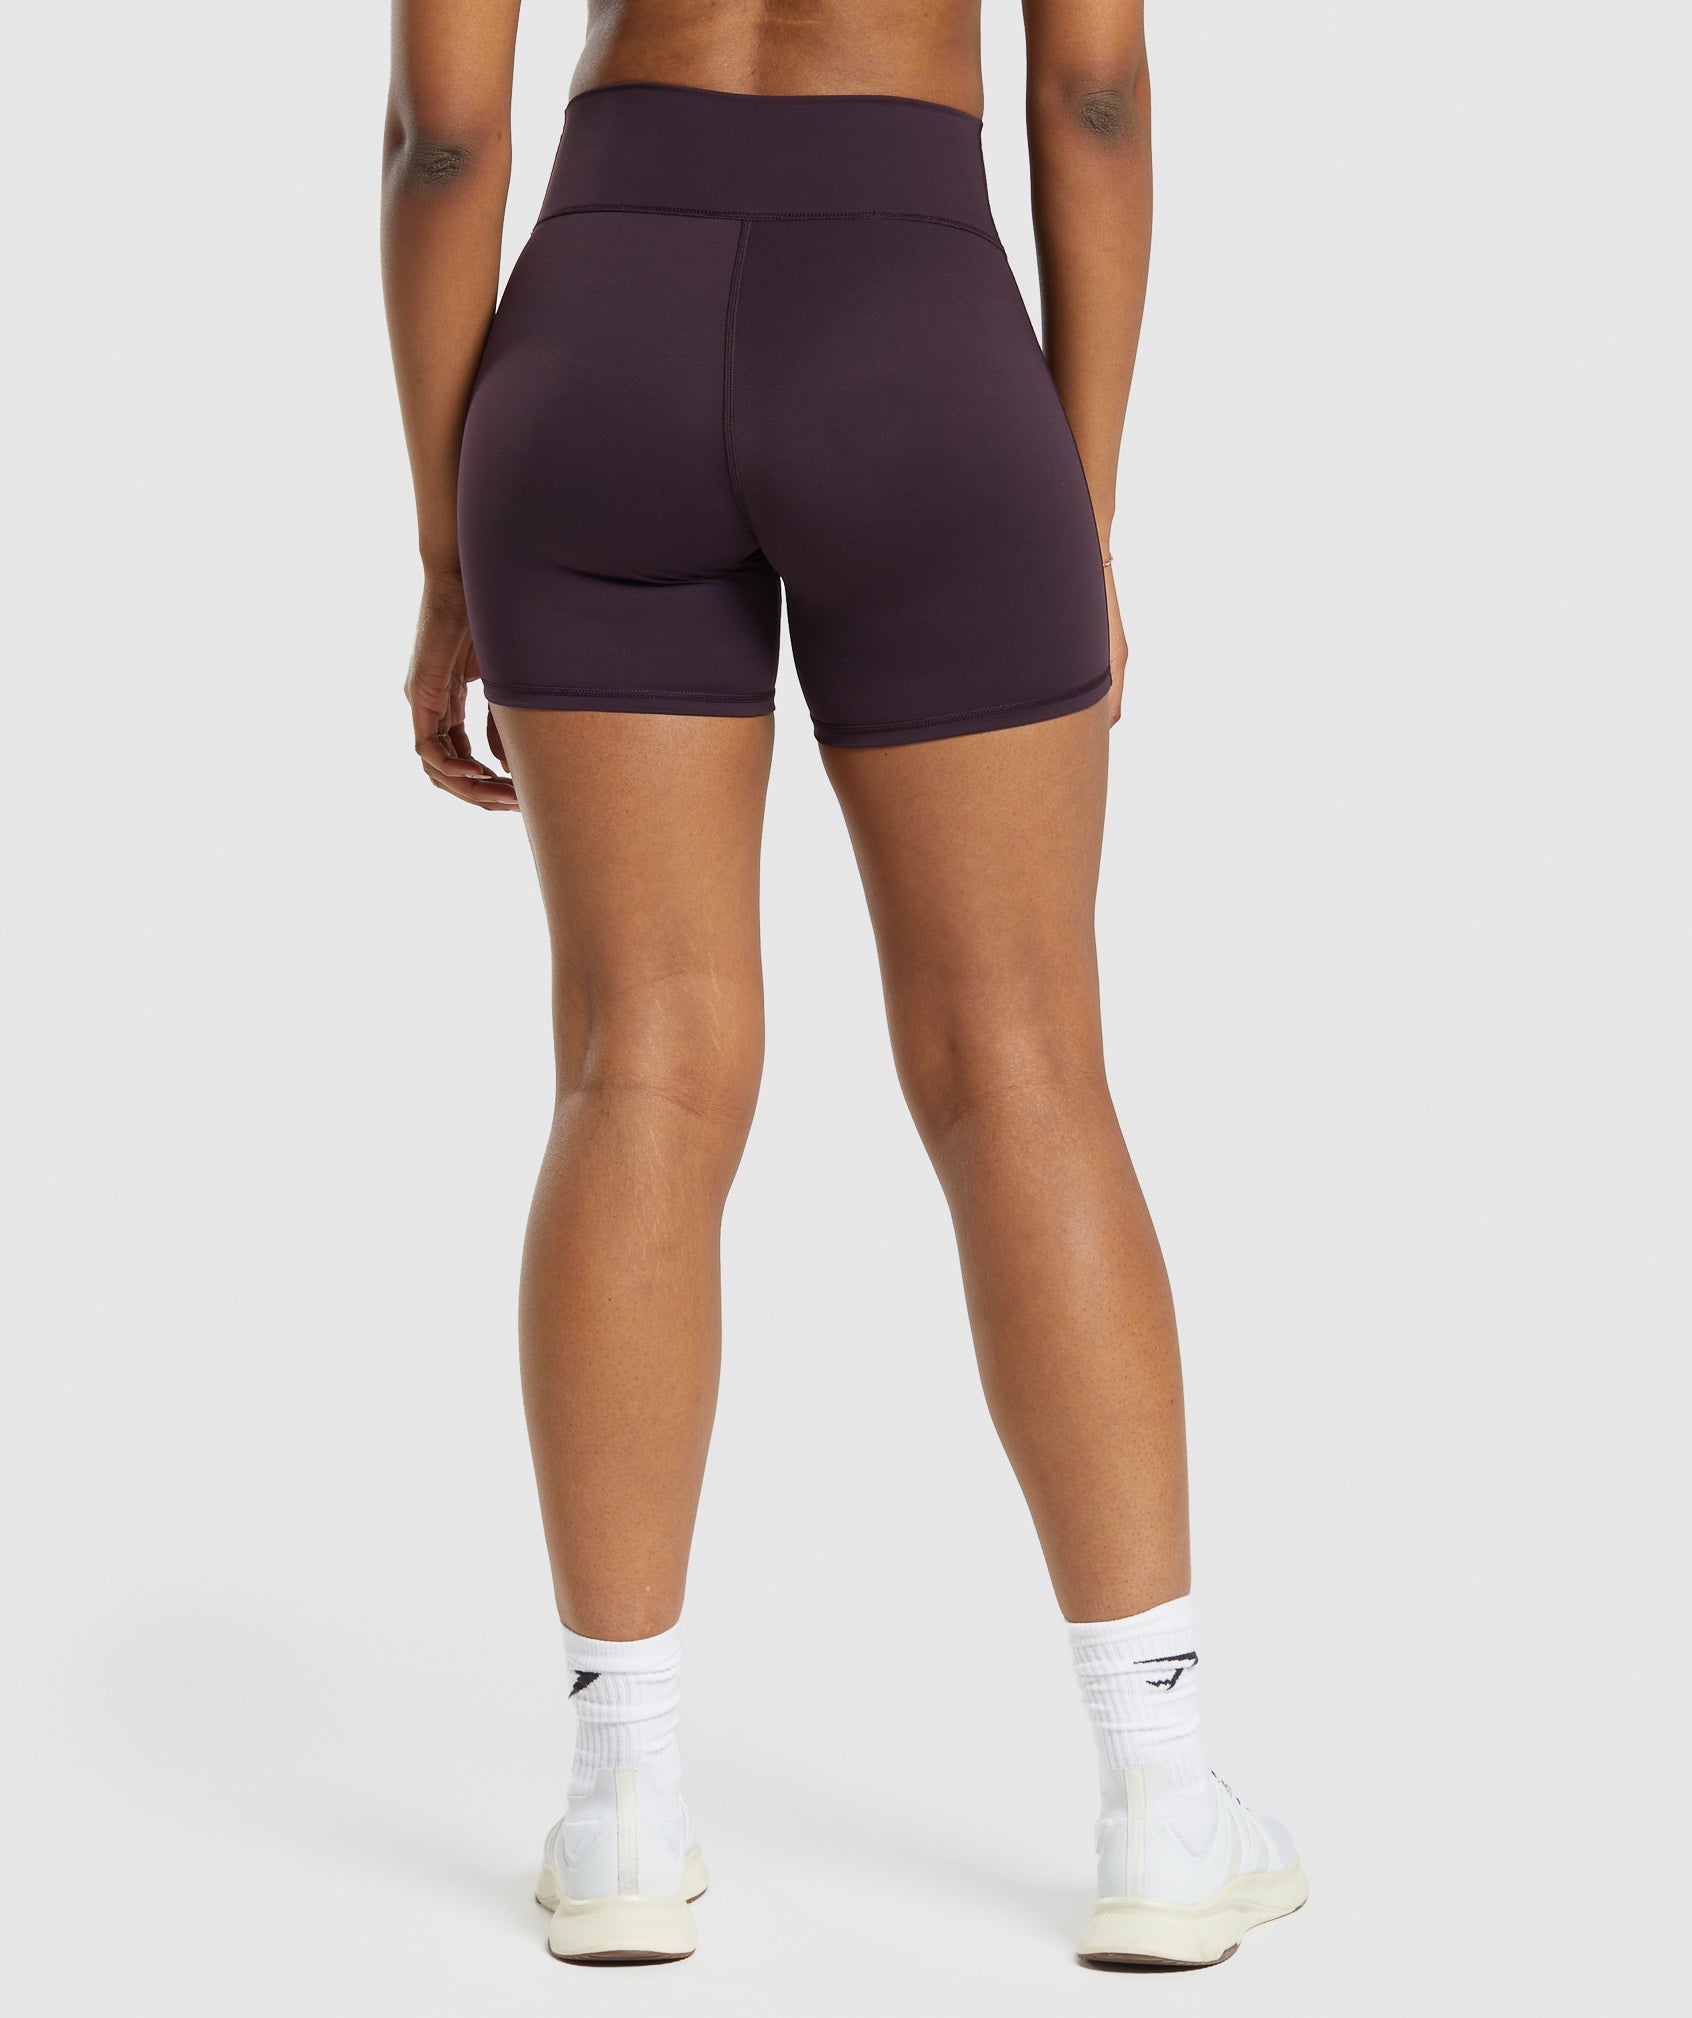 Elevate Shorts in Plum Brown - view 2